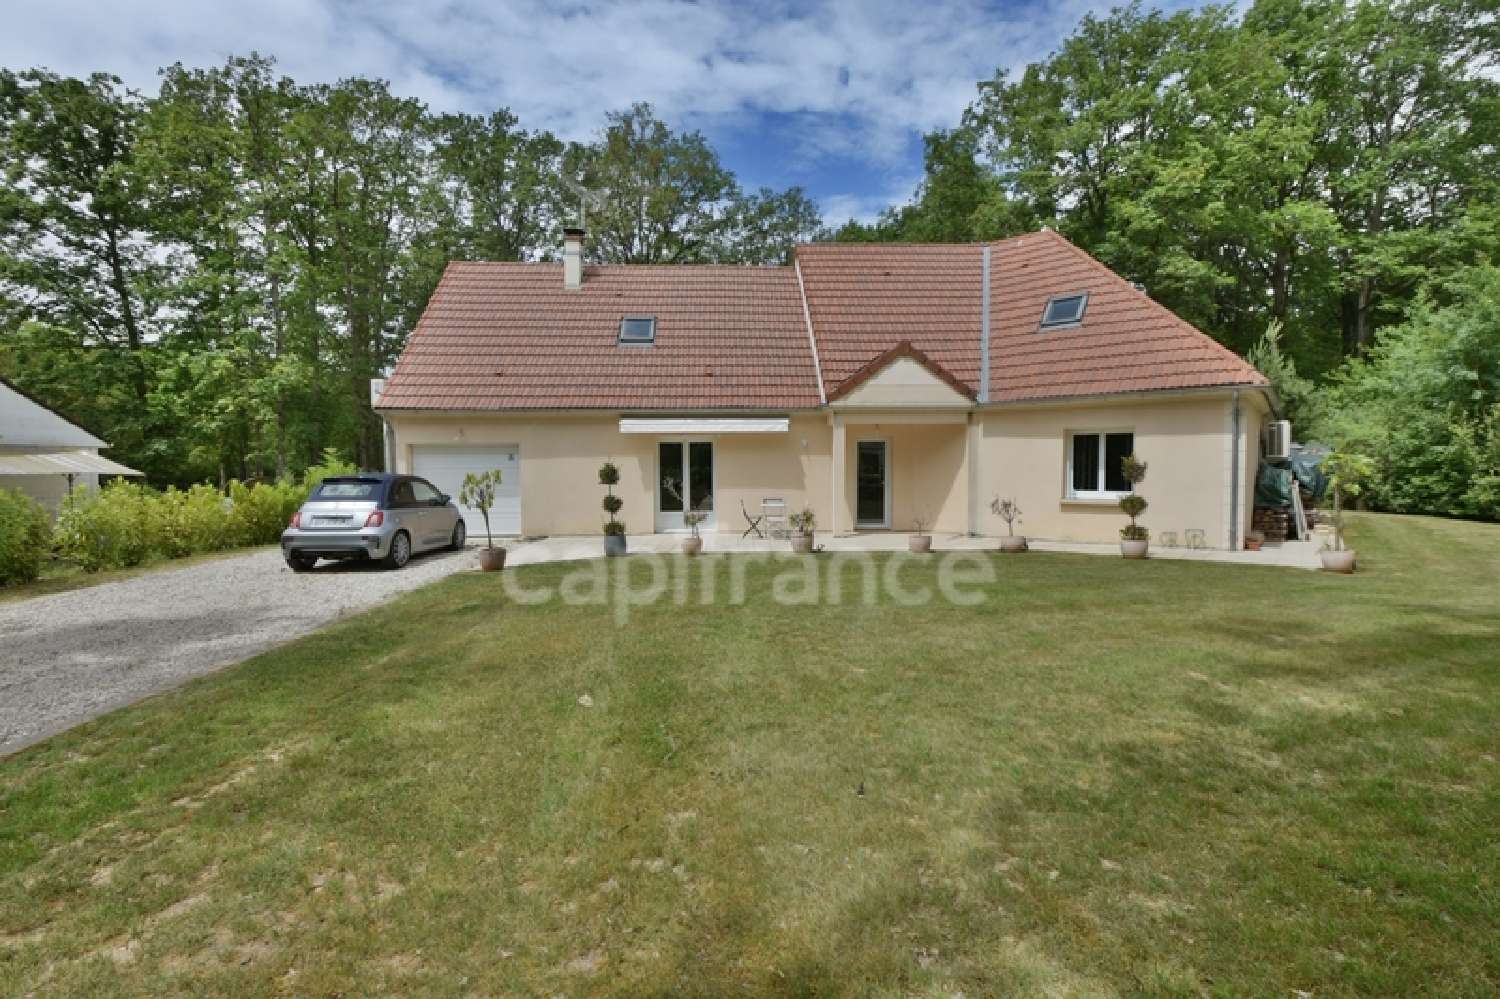  for sale house Sommecaise Yonne 1